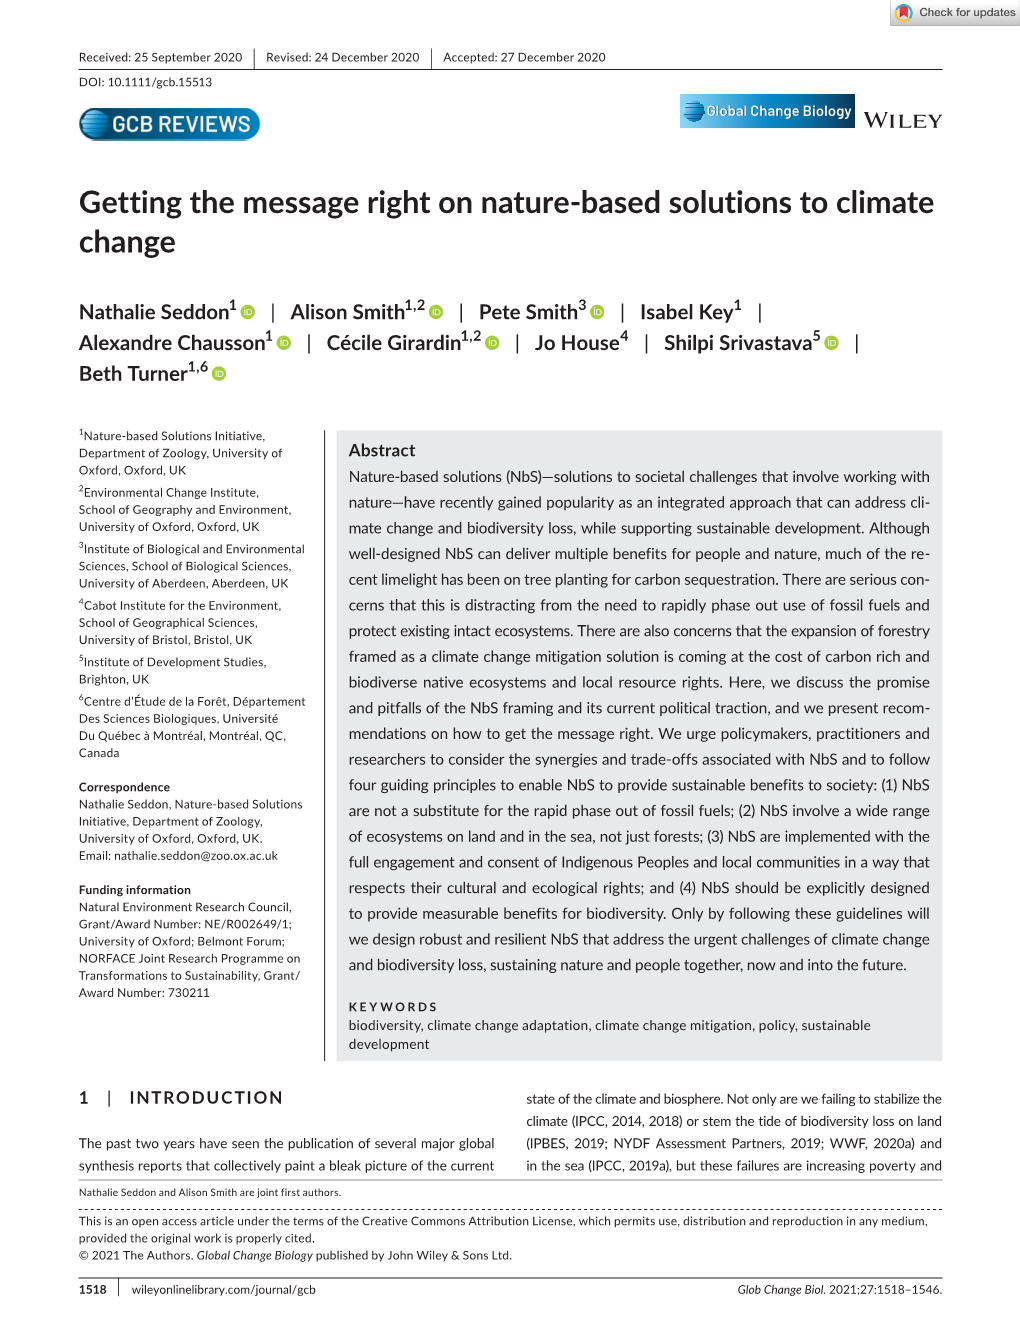 Getting the Message Right on Nature‐Based Solutions to Climate Change